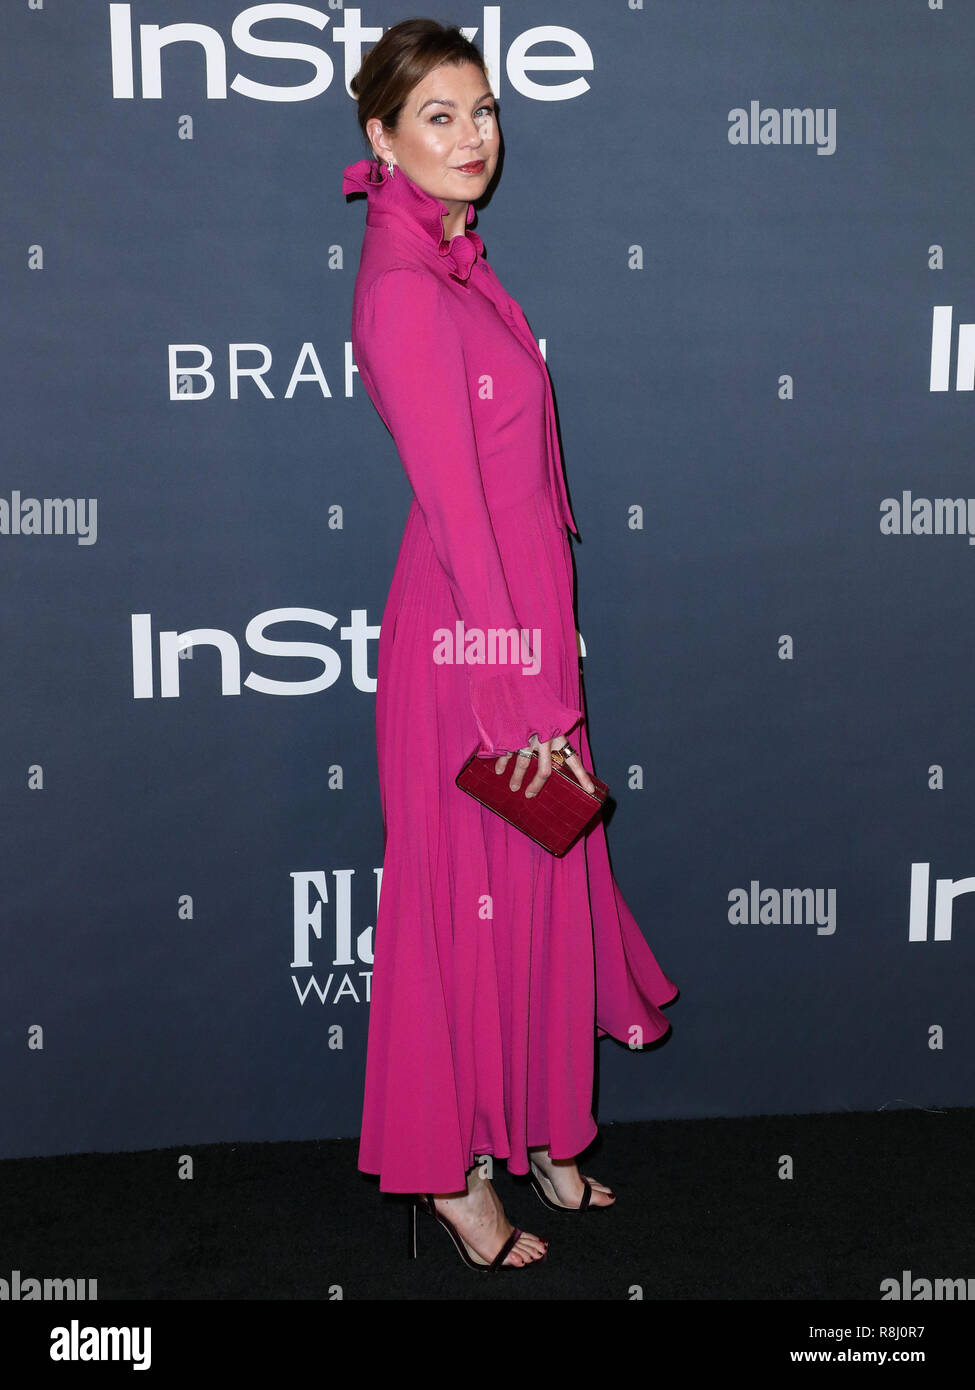 LOS ANGELES, CA, USA - OCTOBER 23: Ellen Pompeo at the InStyle Awards 2017 held at the Getty Center on October 23, 2017 in Los Angeles, California, United States. (Photo by Xavier Collin/Image Press Agency) Stock Photo